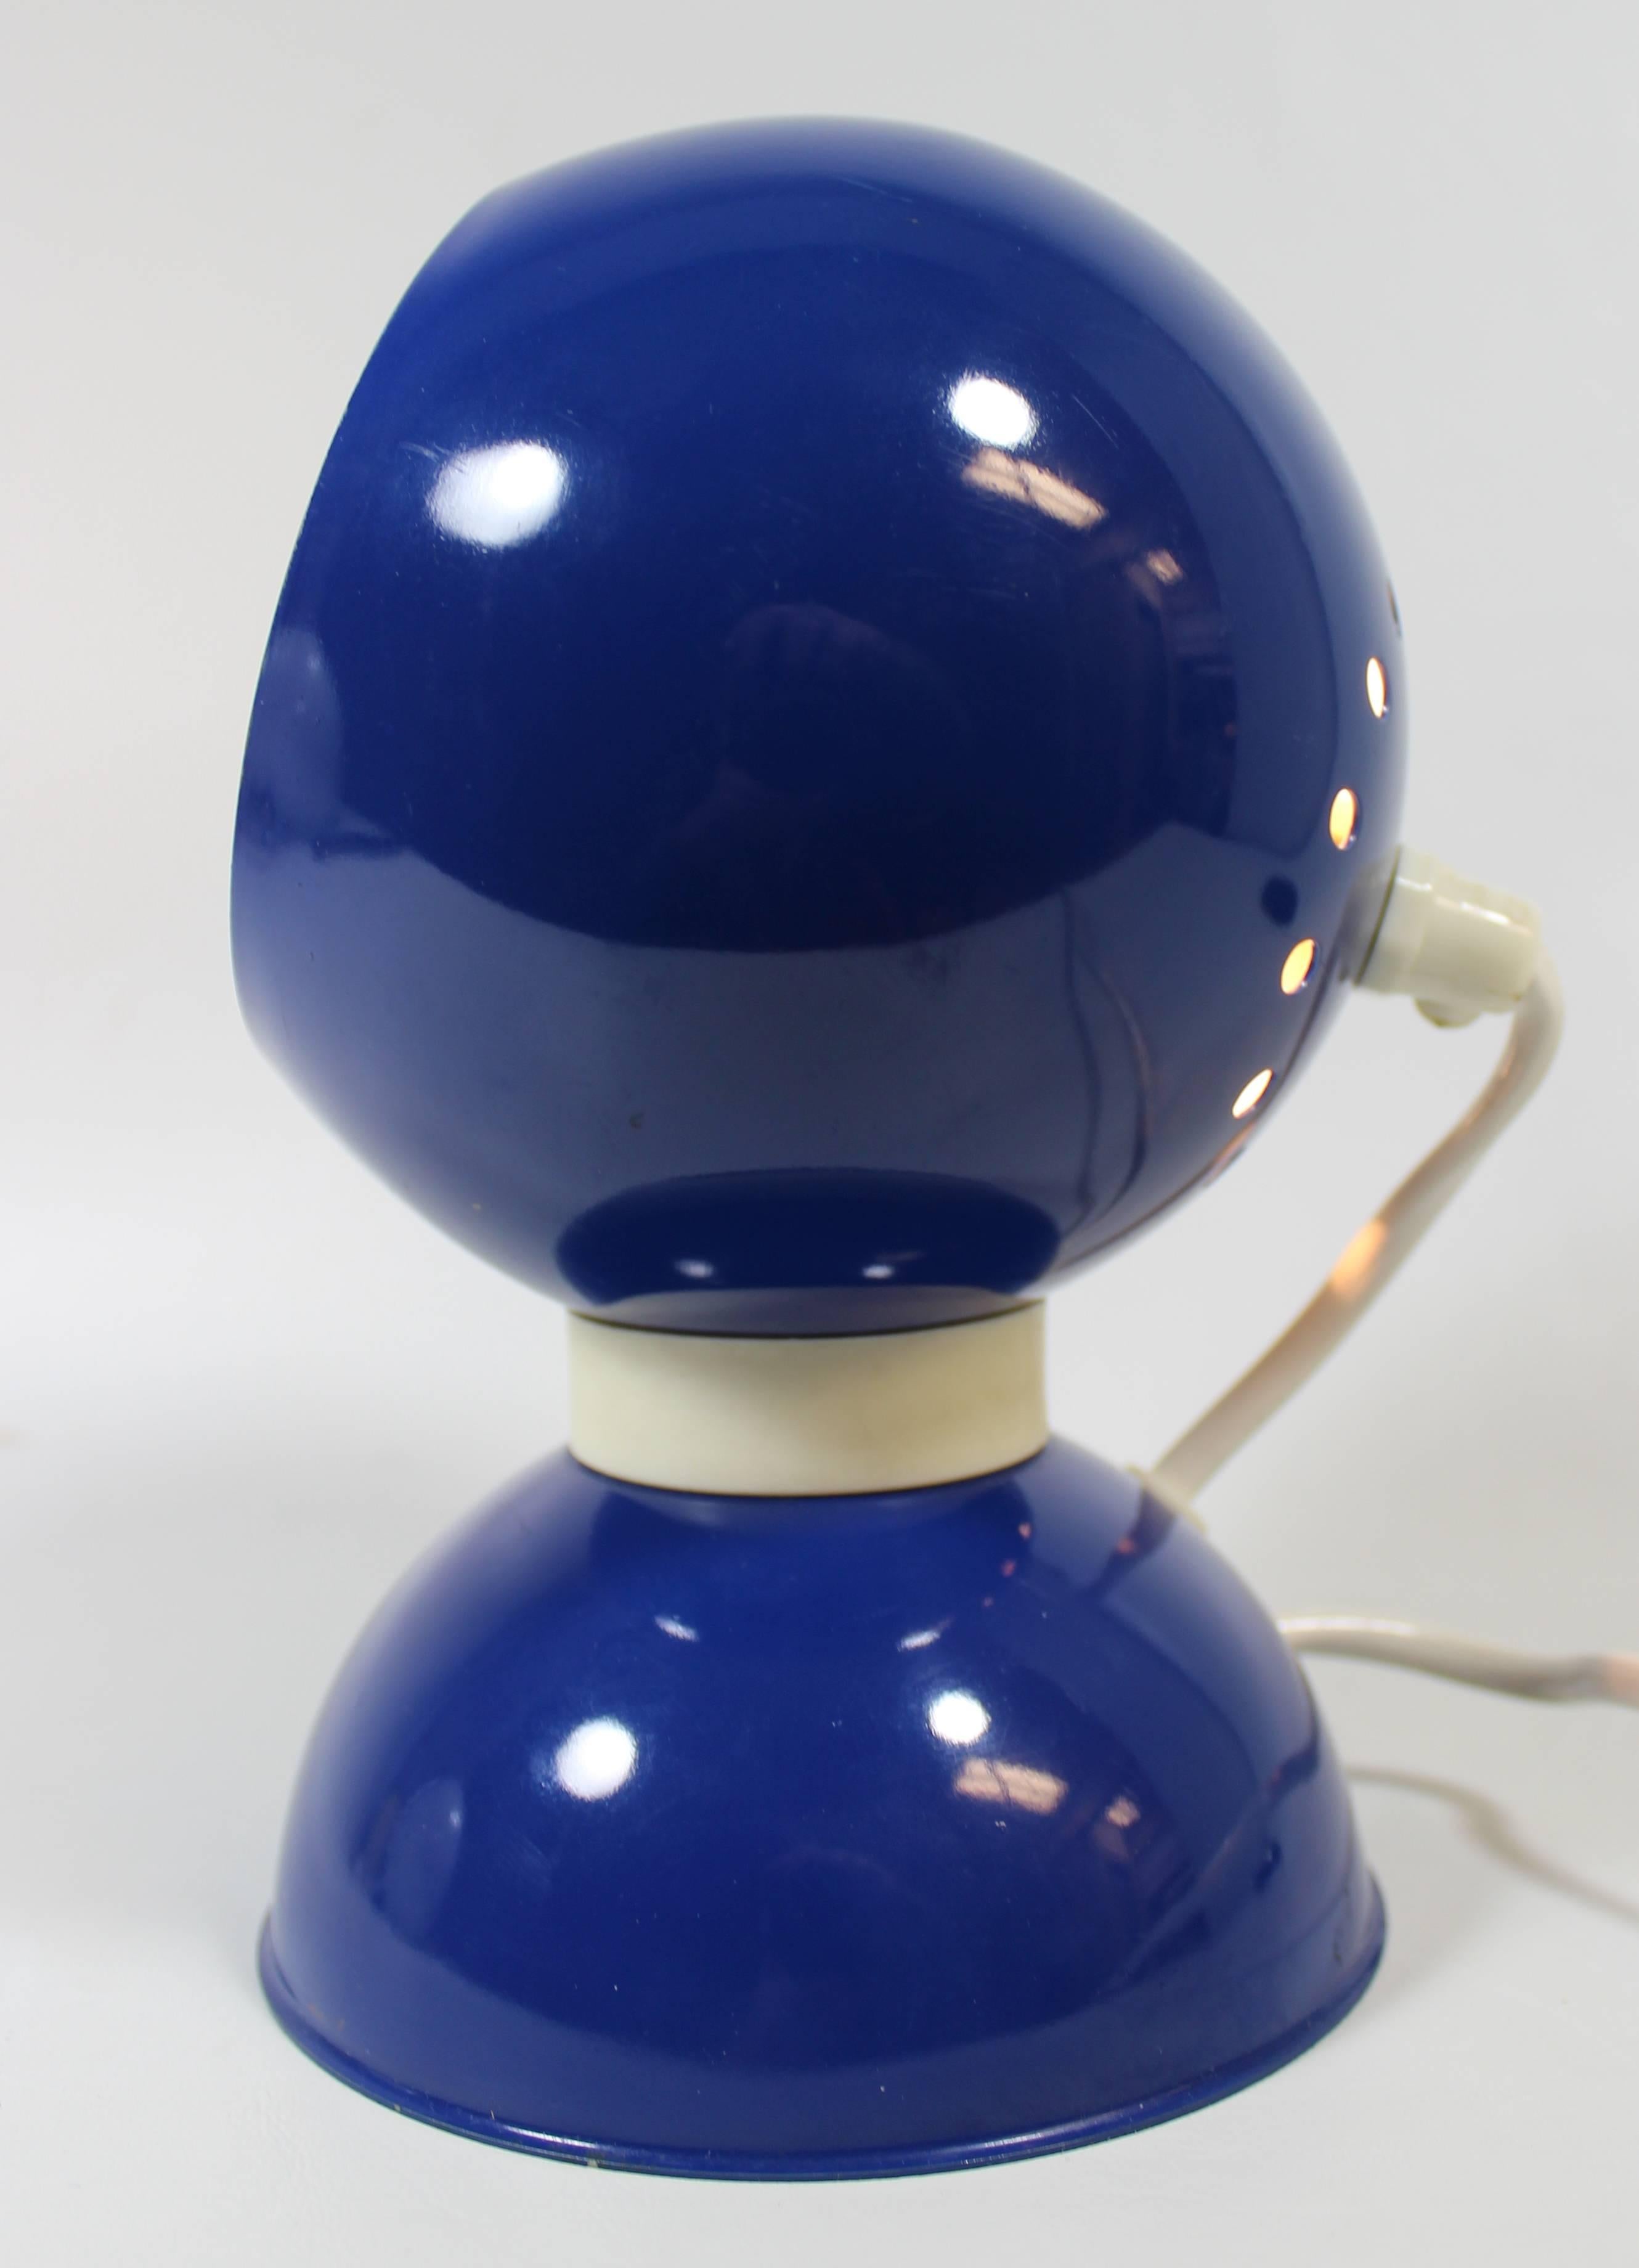 Goffredo Reggiani Italian lamp with adjustable ball on magnetic base.

Free shipping within the United States and Canada.

